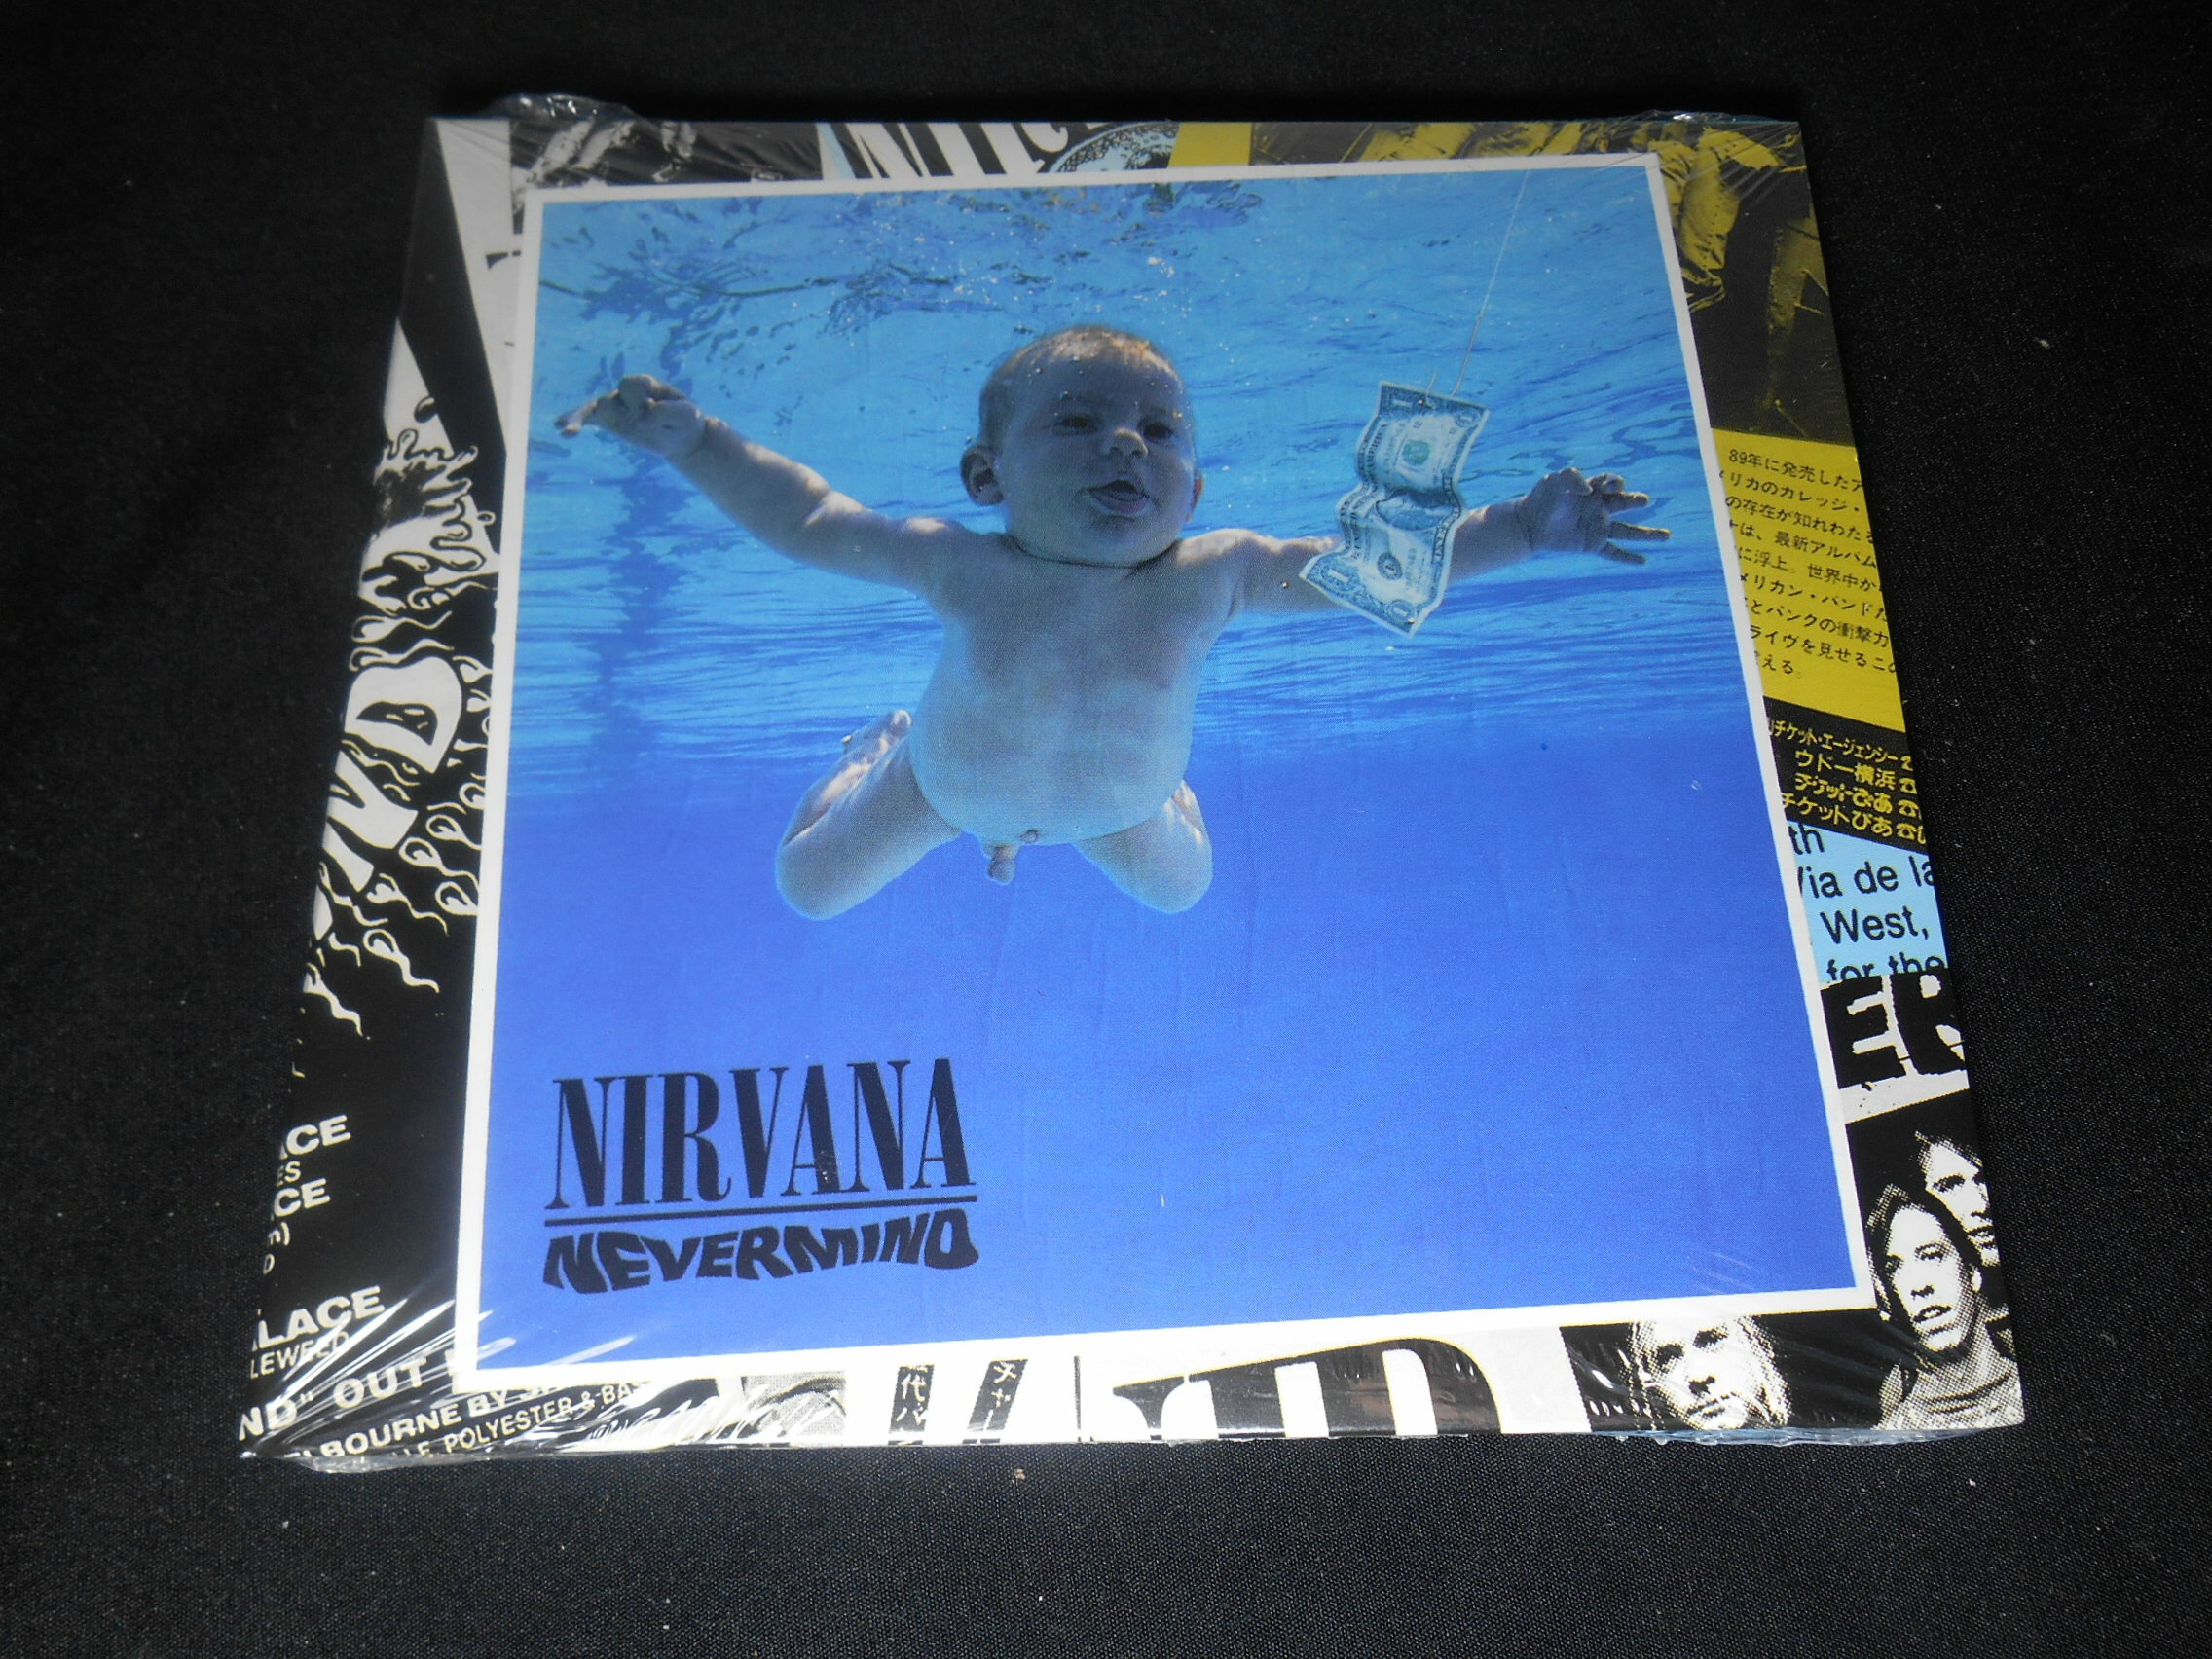 CD - Nirvana - Nevermind 30th Deluxe Edition (Lacrado/Papersleeve/Duplo)